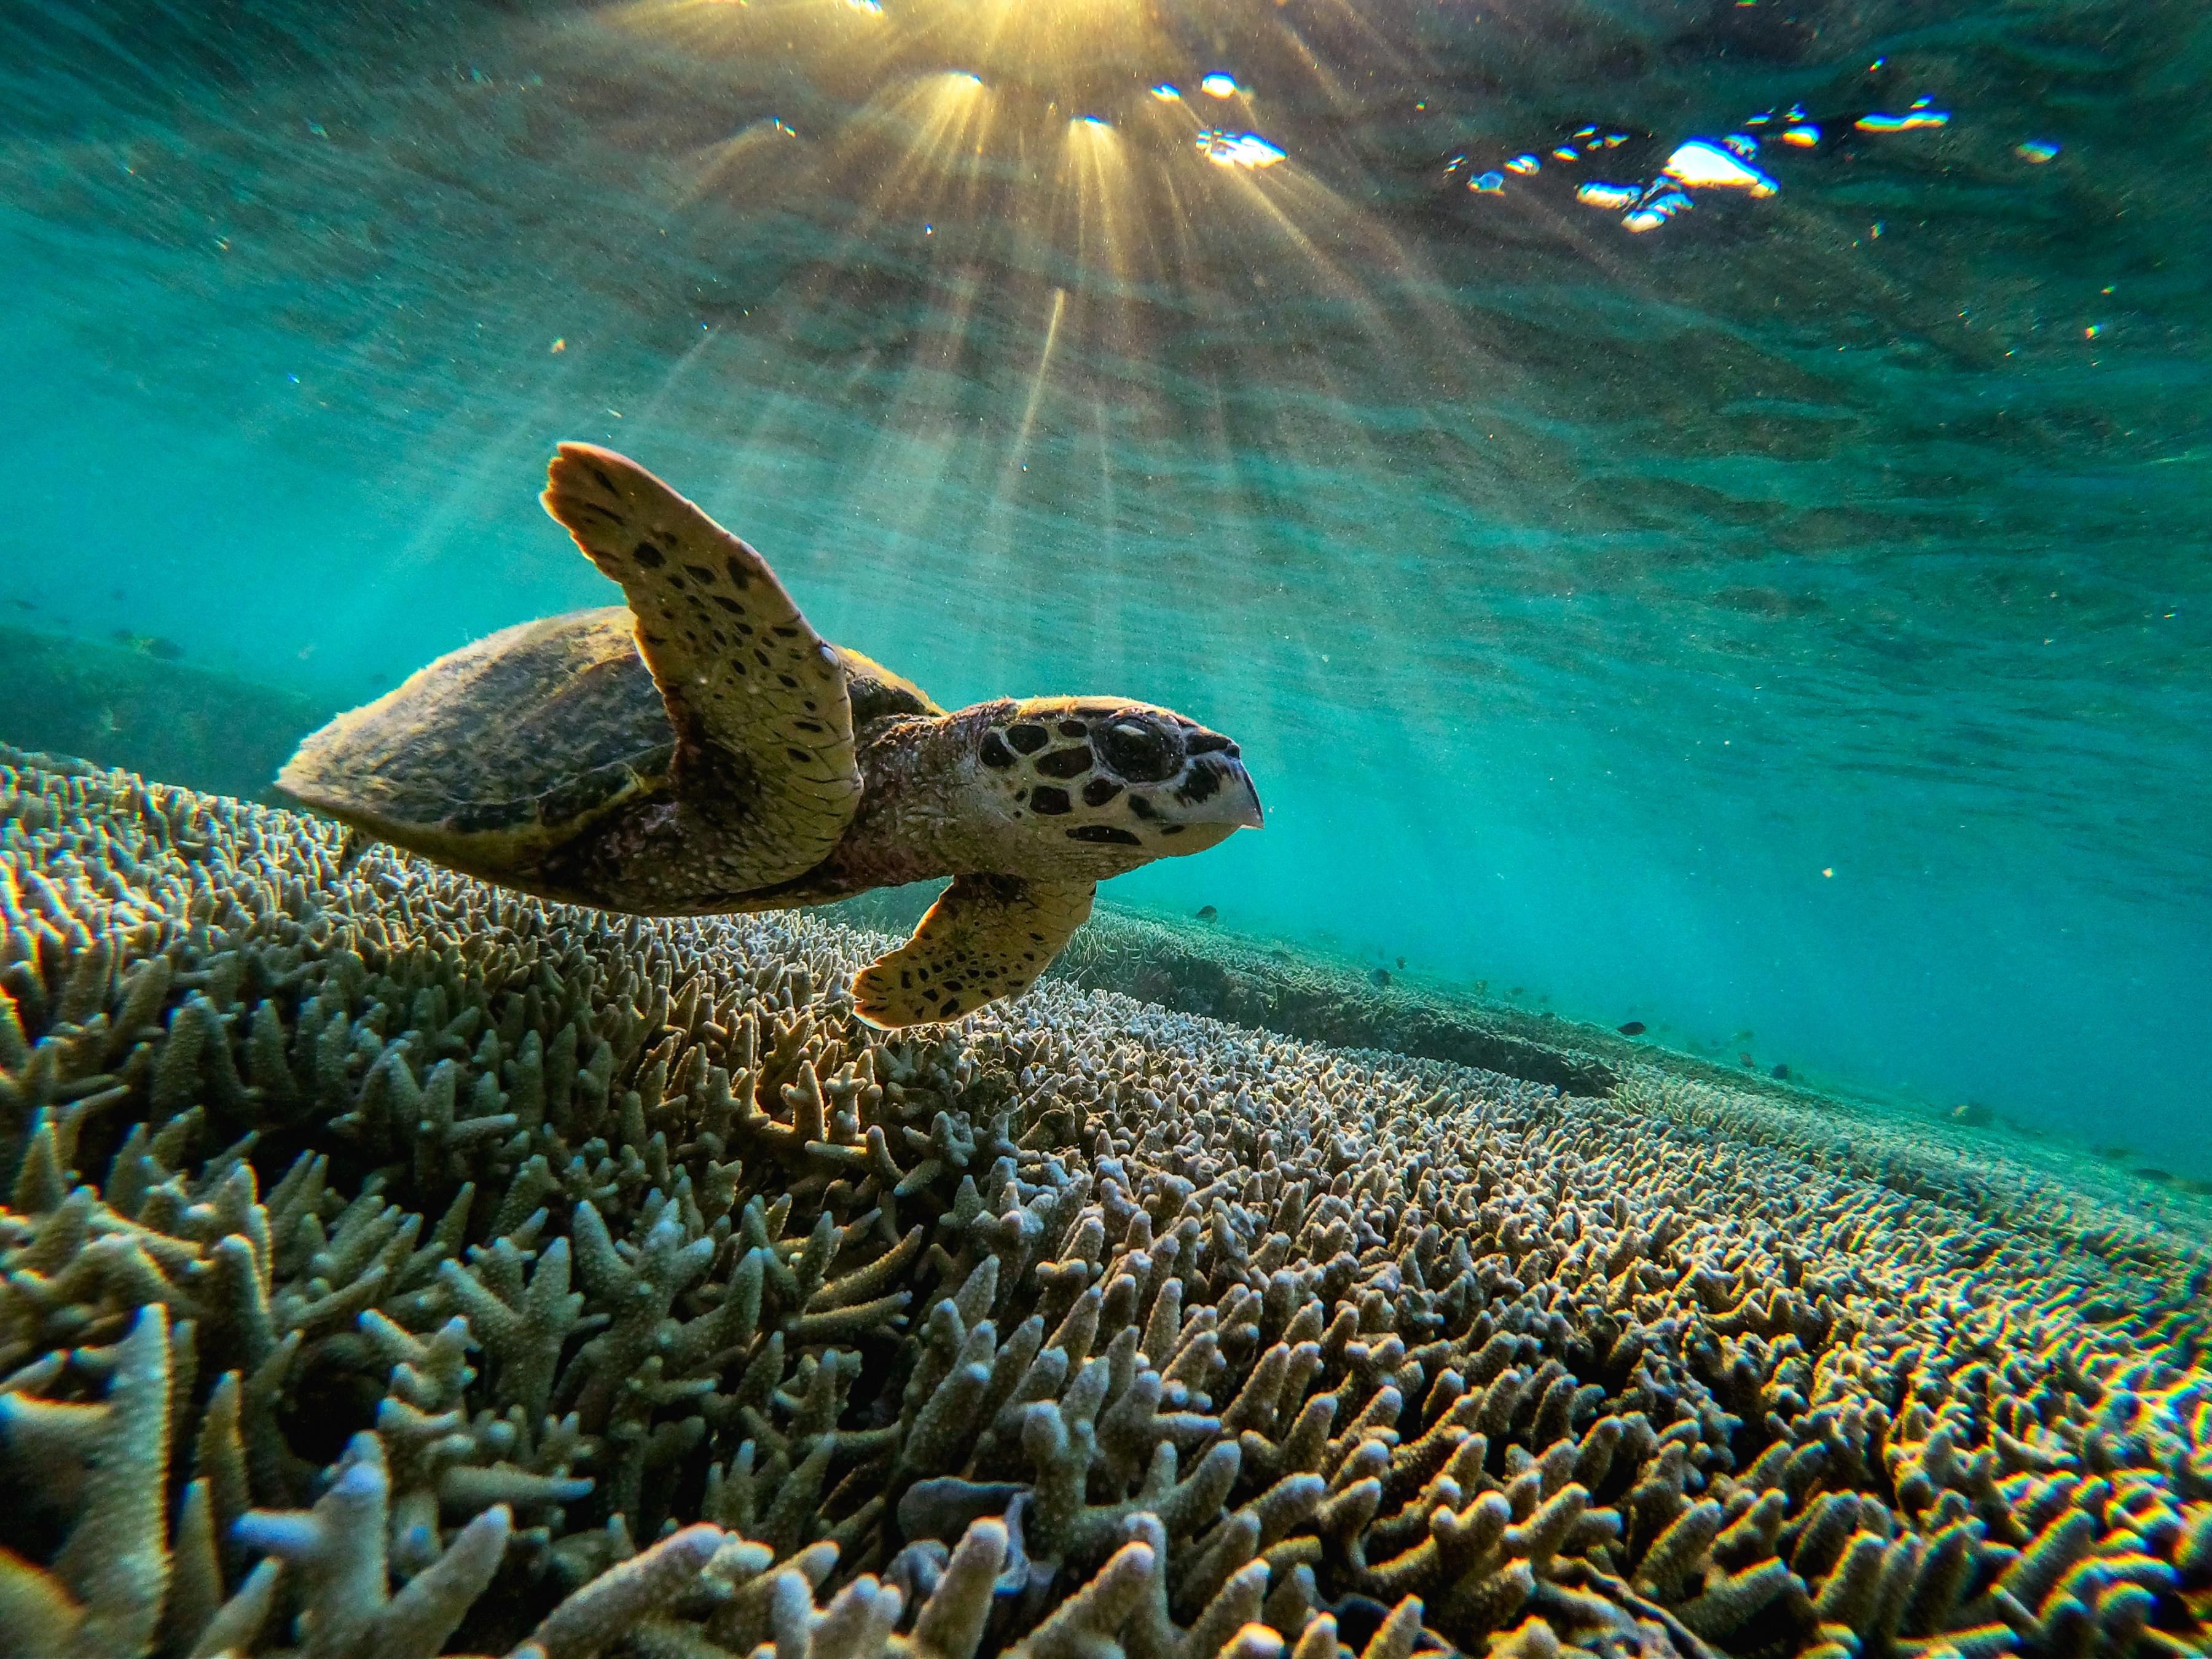 A turtle swims among the coral of the Great Barrier Reef